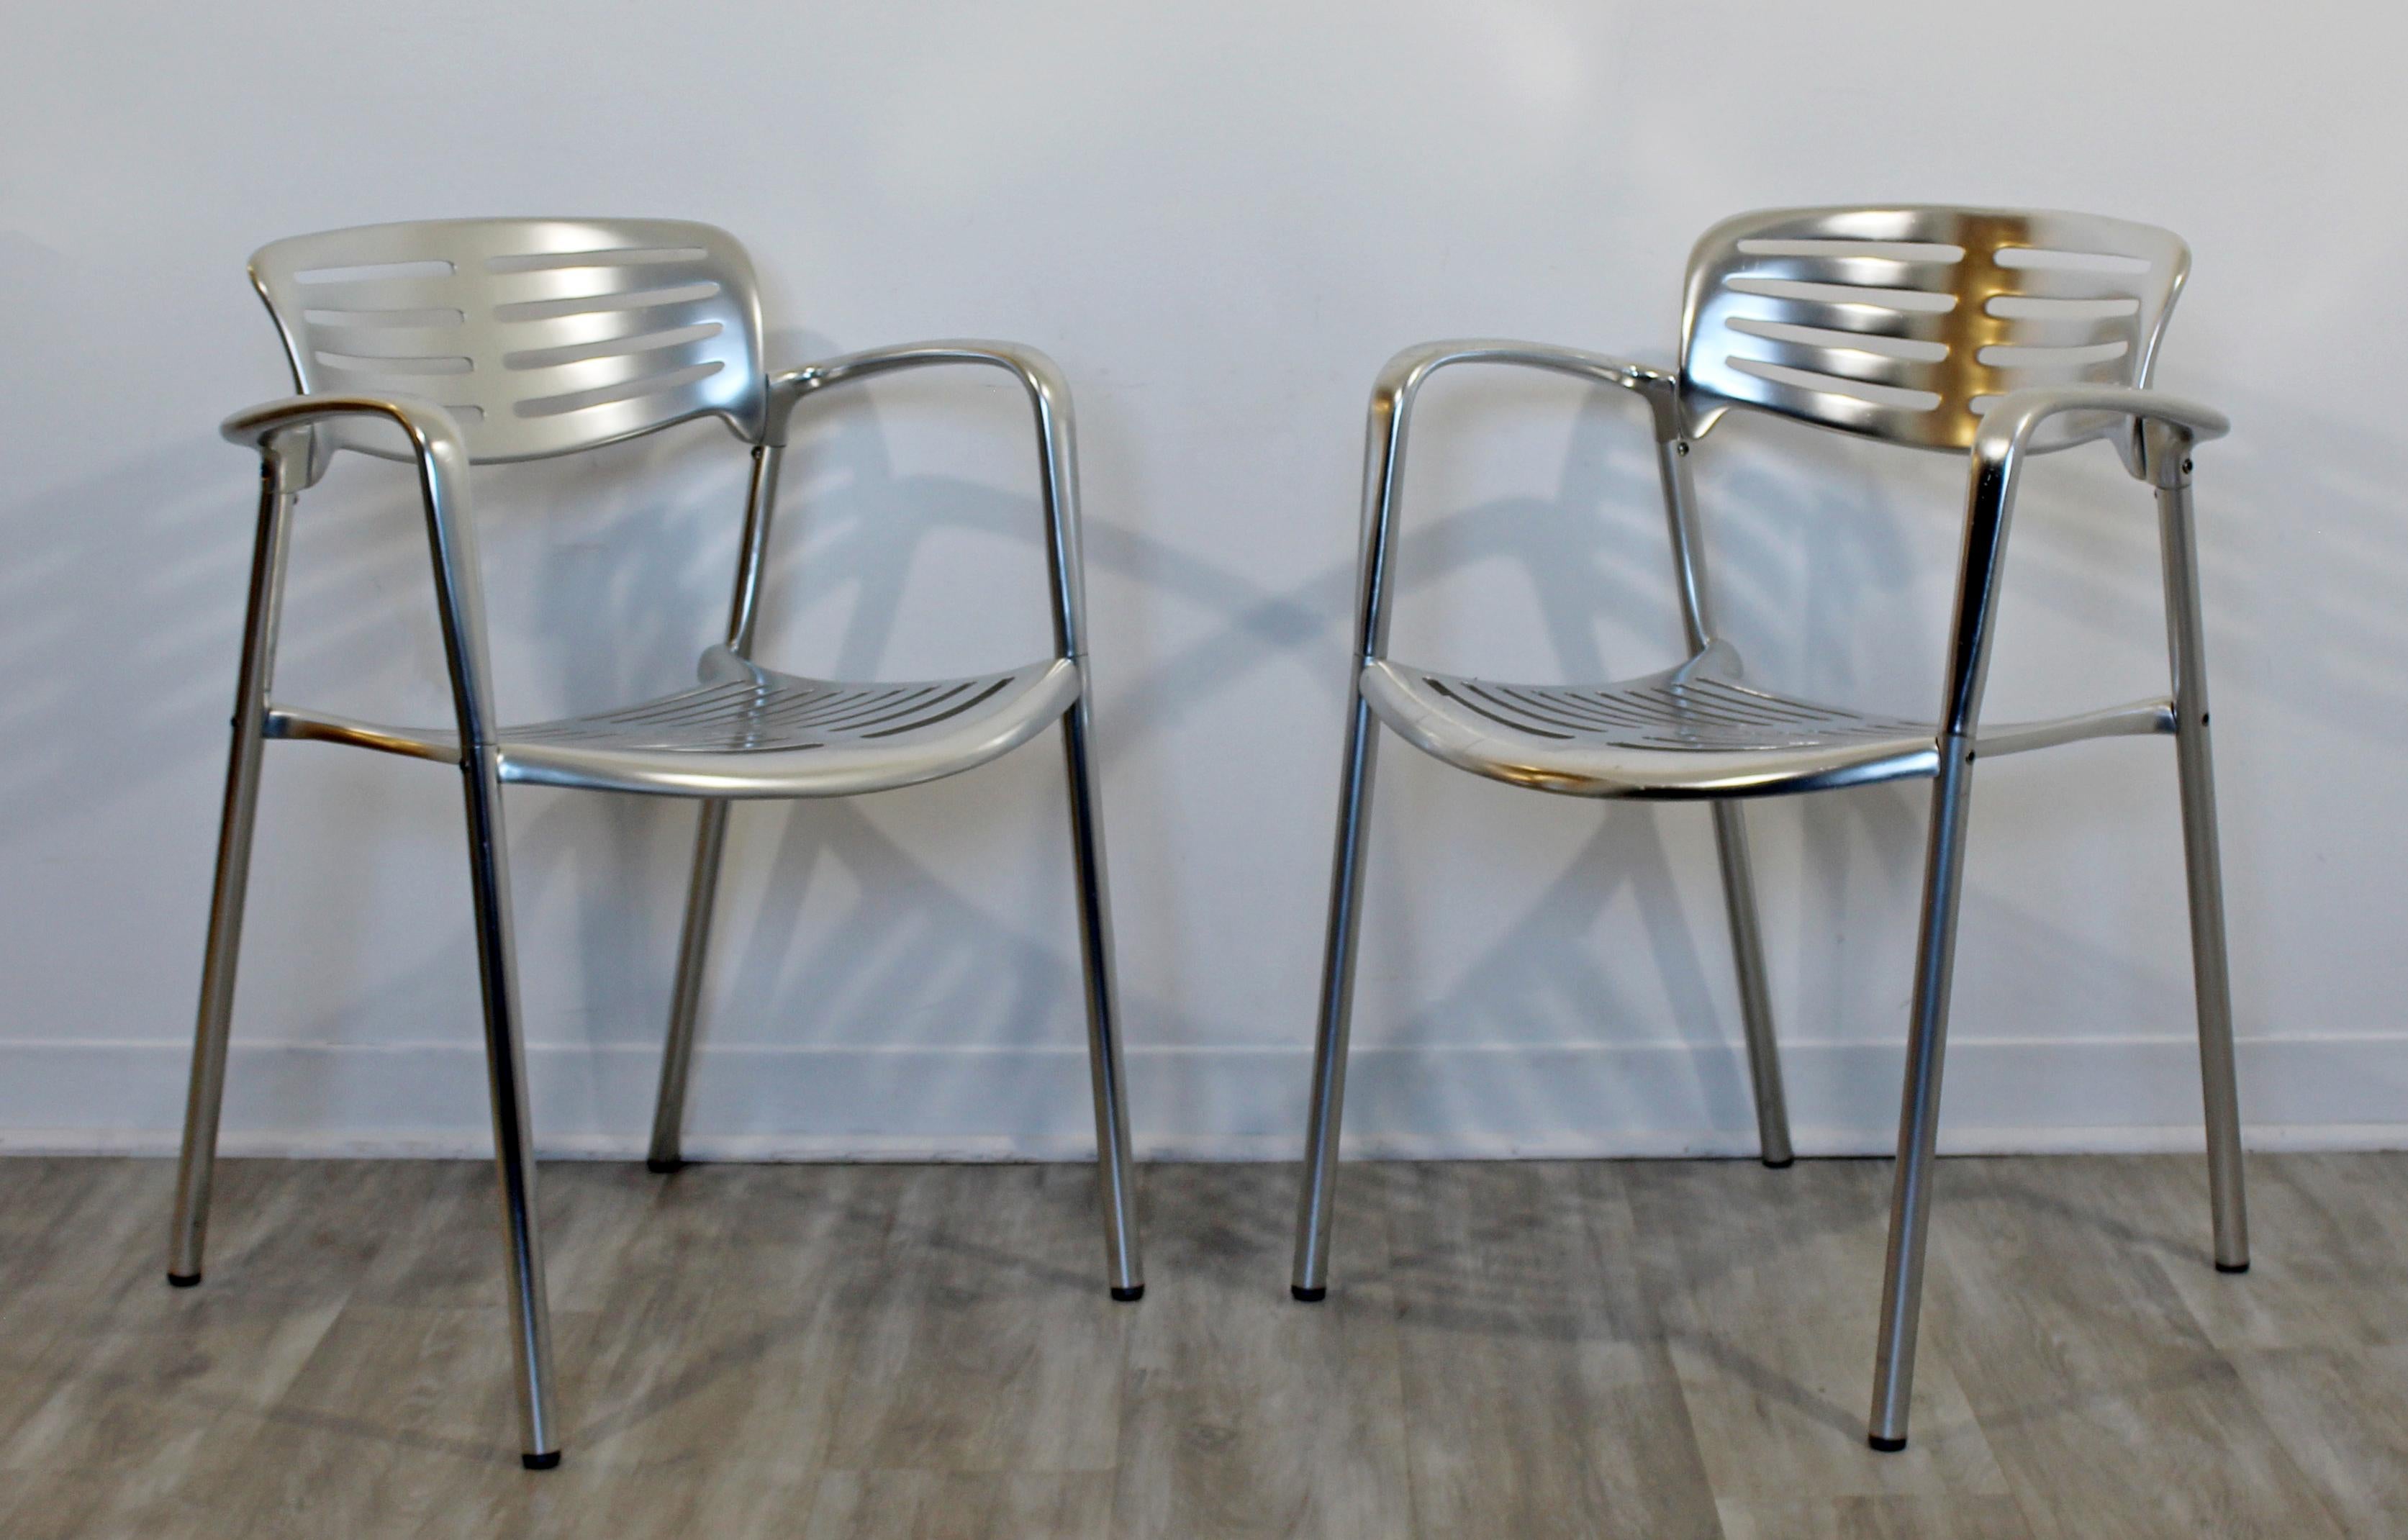 Spanish Contemporary Modernist Aluminum Set of 8 Chairs Toledo by Jorge Pensi, Spain